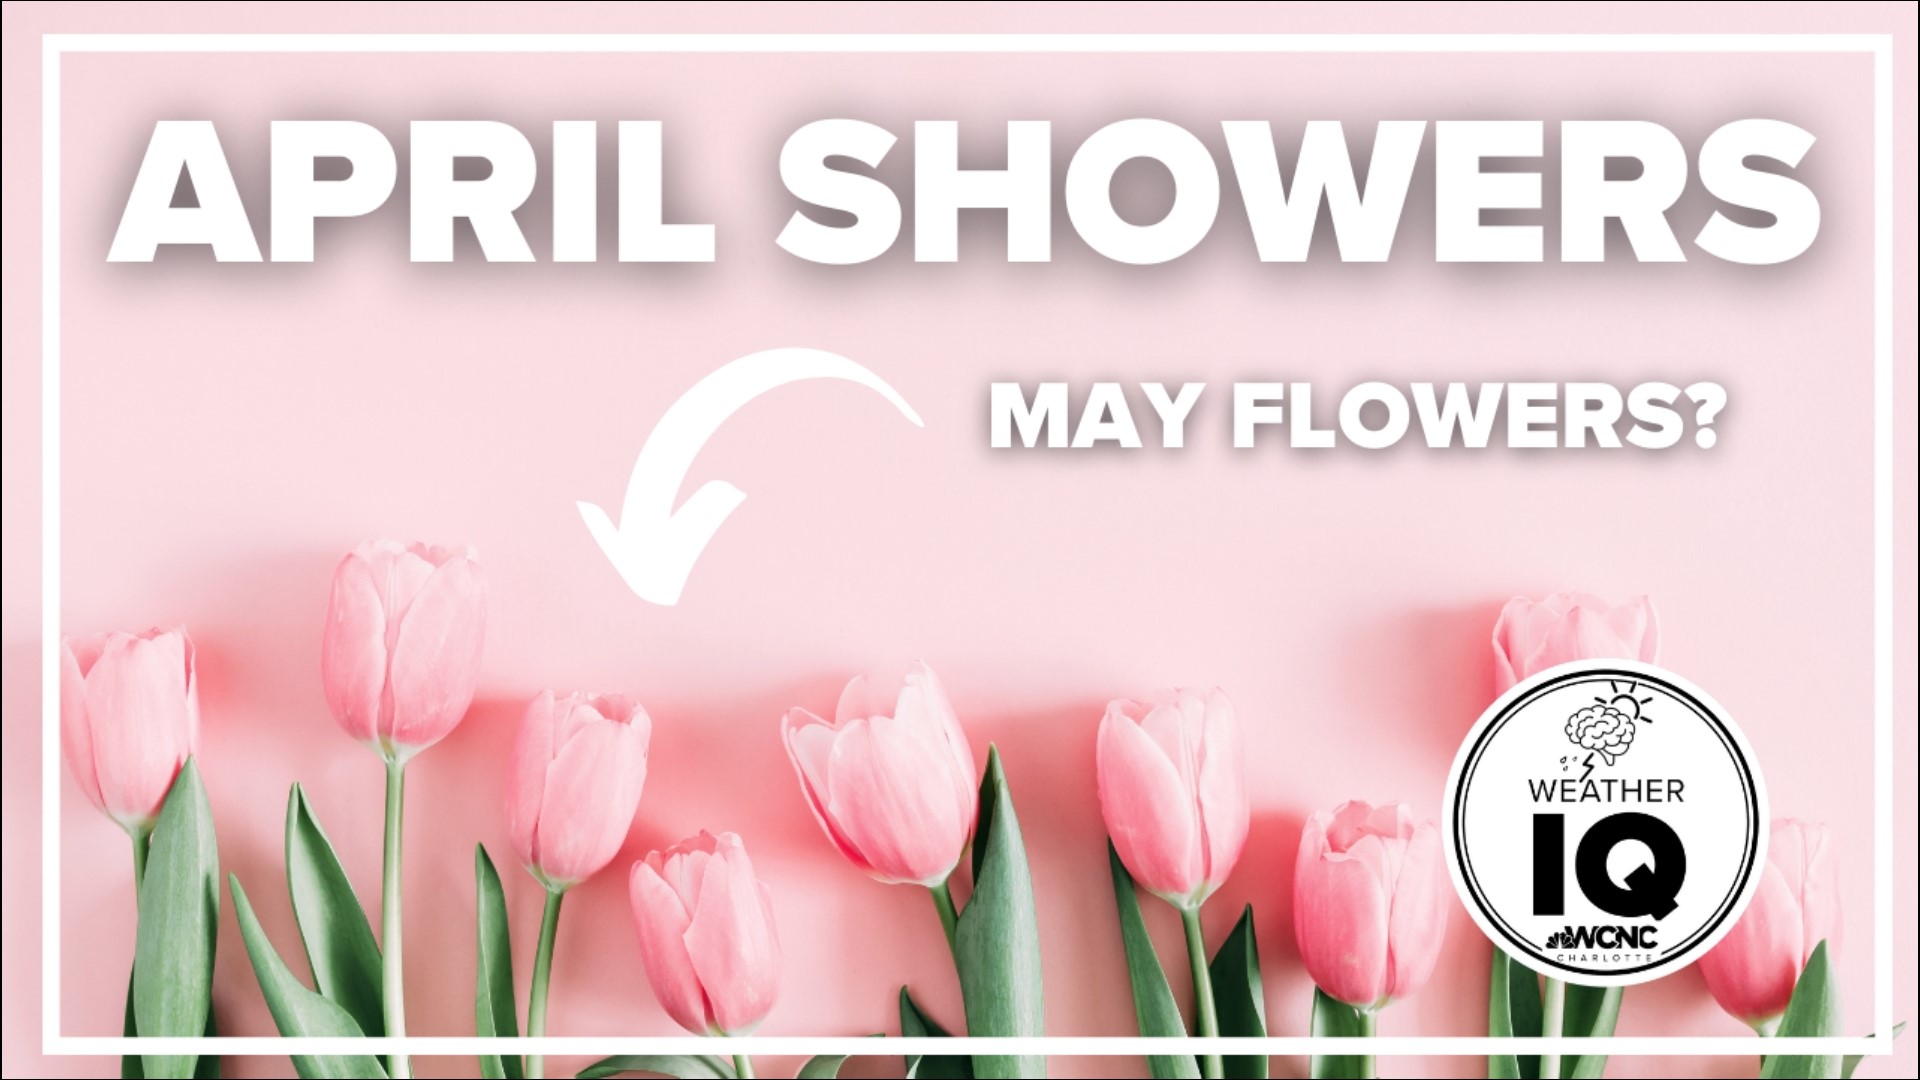 april showers bring may flowers banner